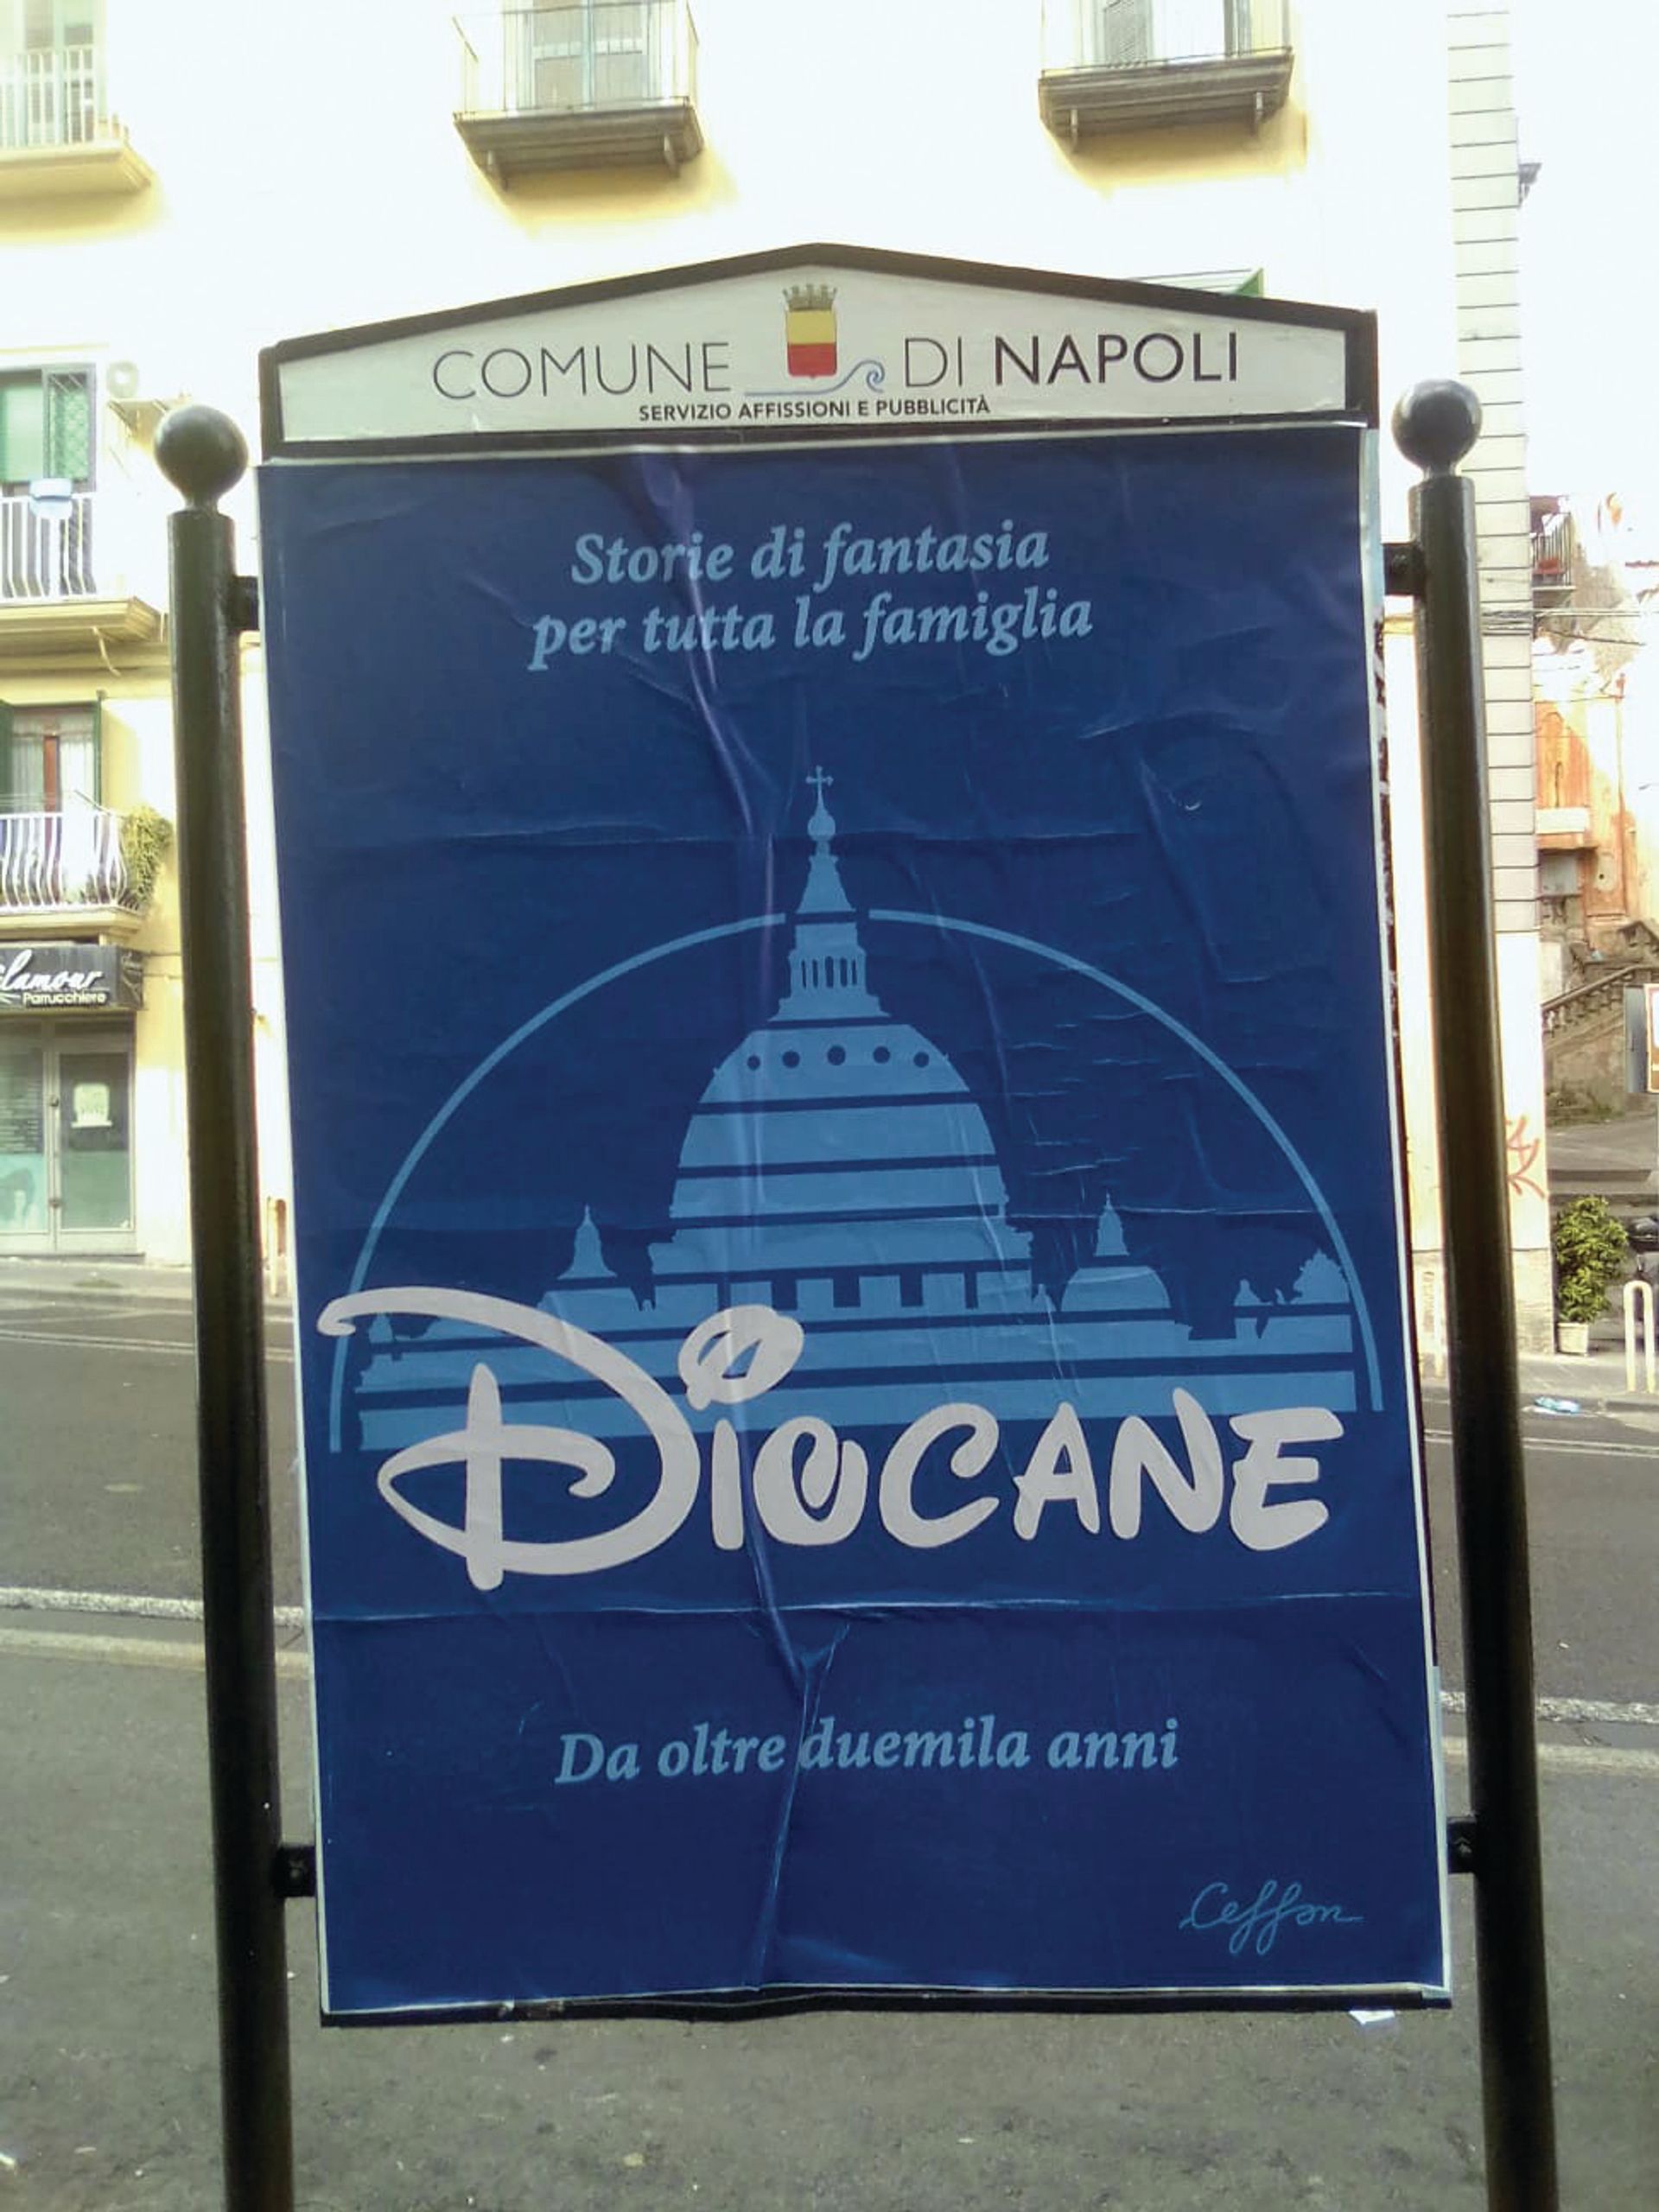 The “subadvertising” campaign altered the designs of famous brands to display expletives such as “dio cane” (dog God). Photo: Ceci n’est pas un blasphème. 